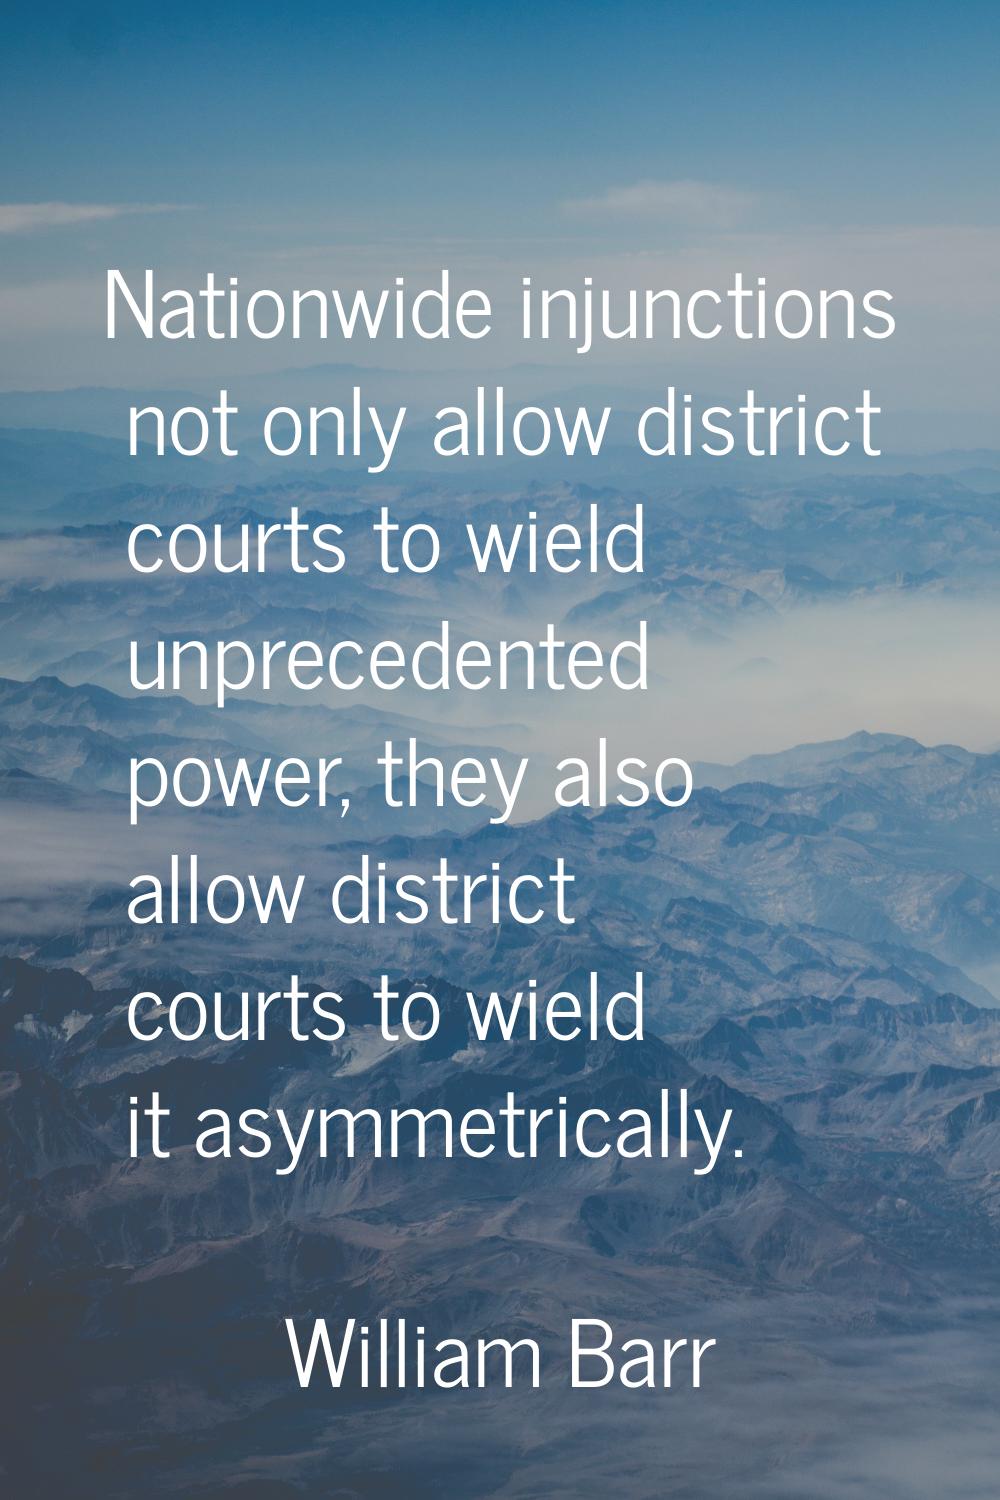 Nationwide injunctions not only allow district courts to wield unprecedented power, they also allow